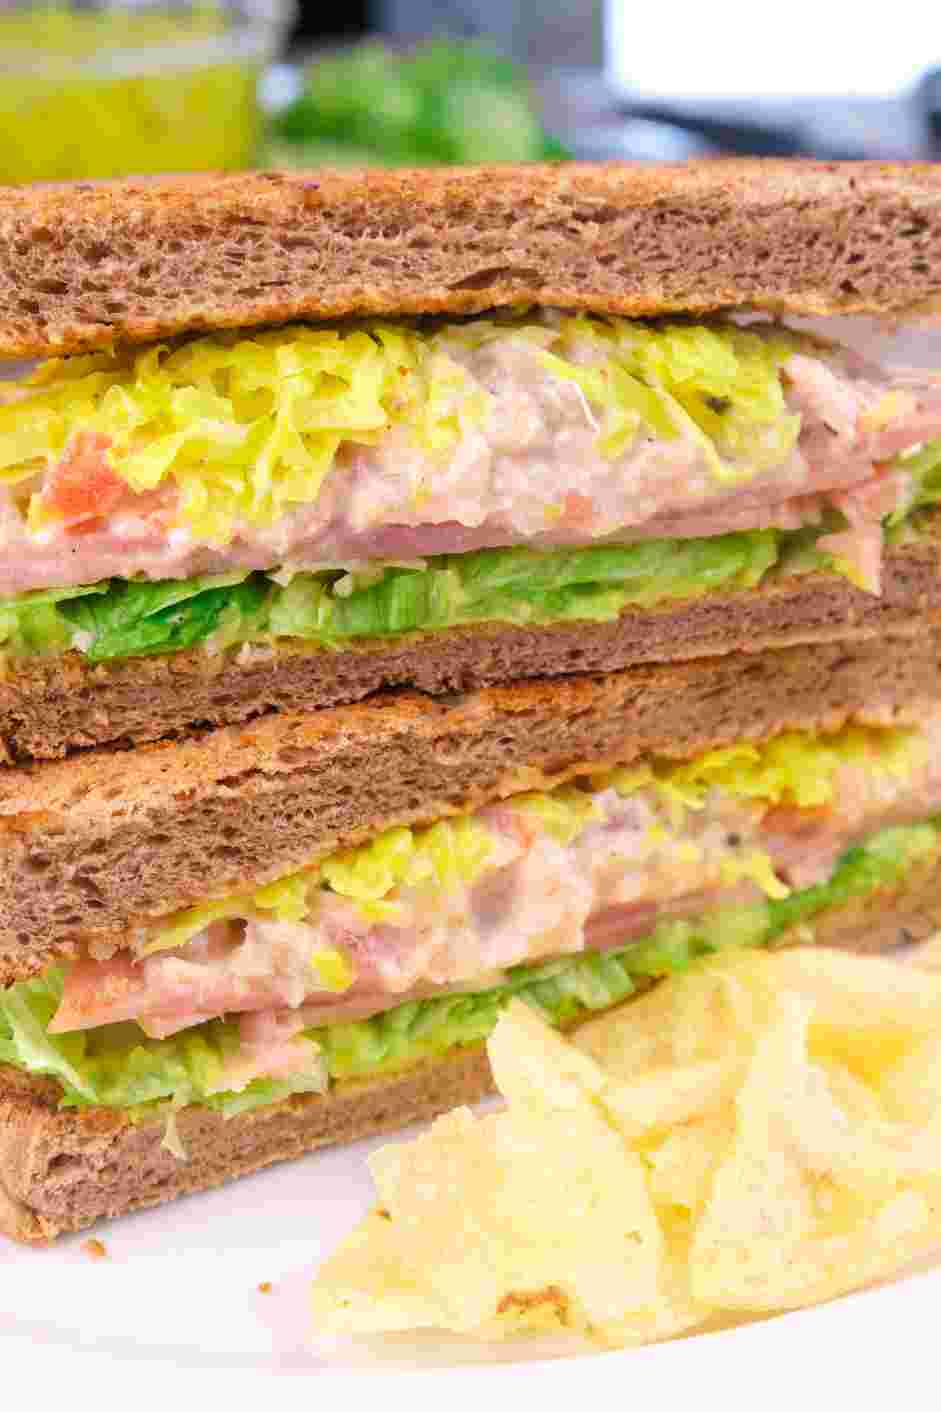 Salmon Sandwich Recipe: Cut and serve with your favorite chips, a warm bowl of soup or both.